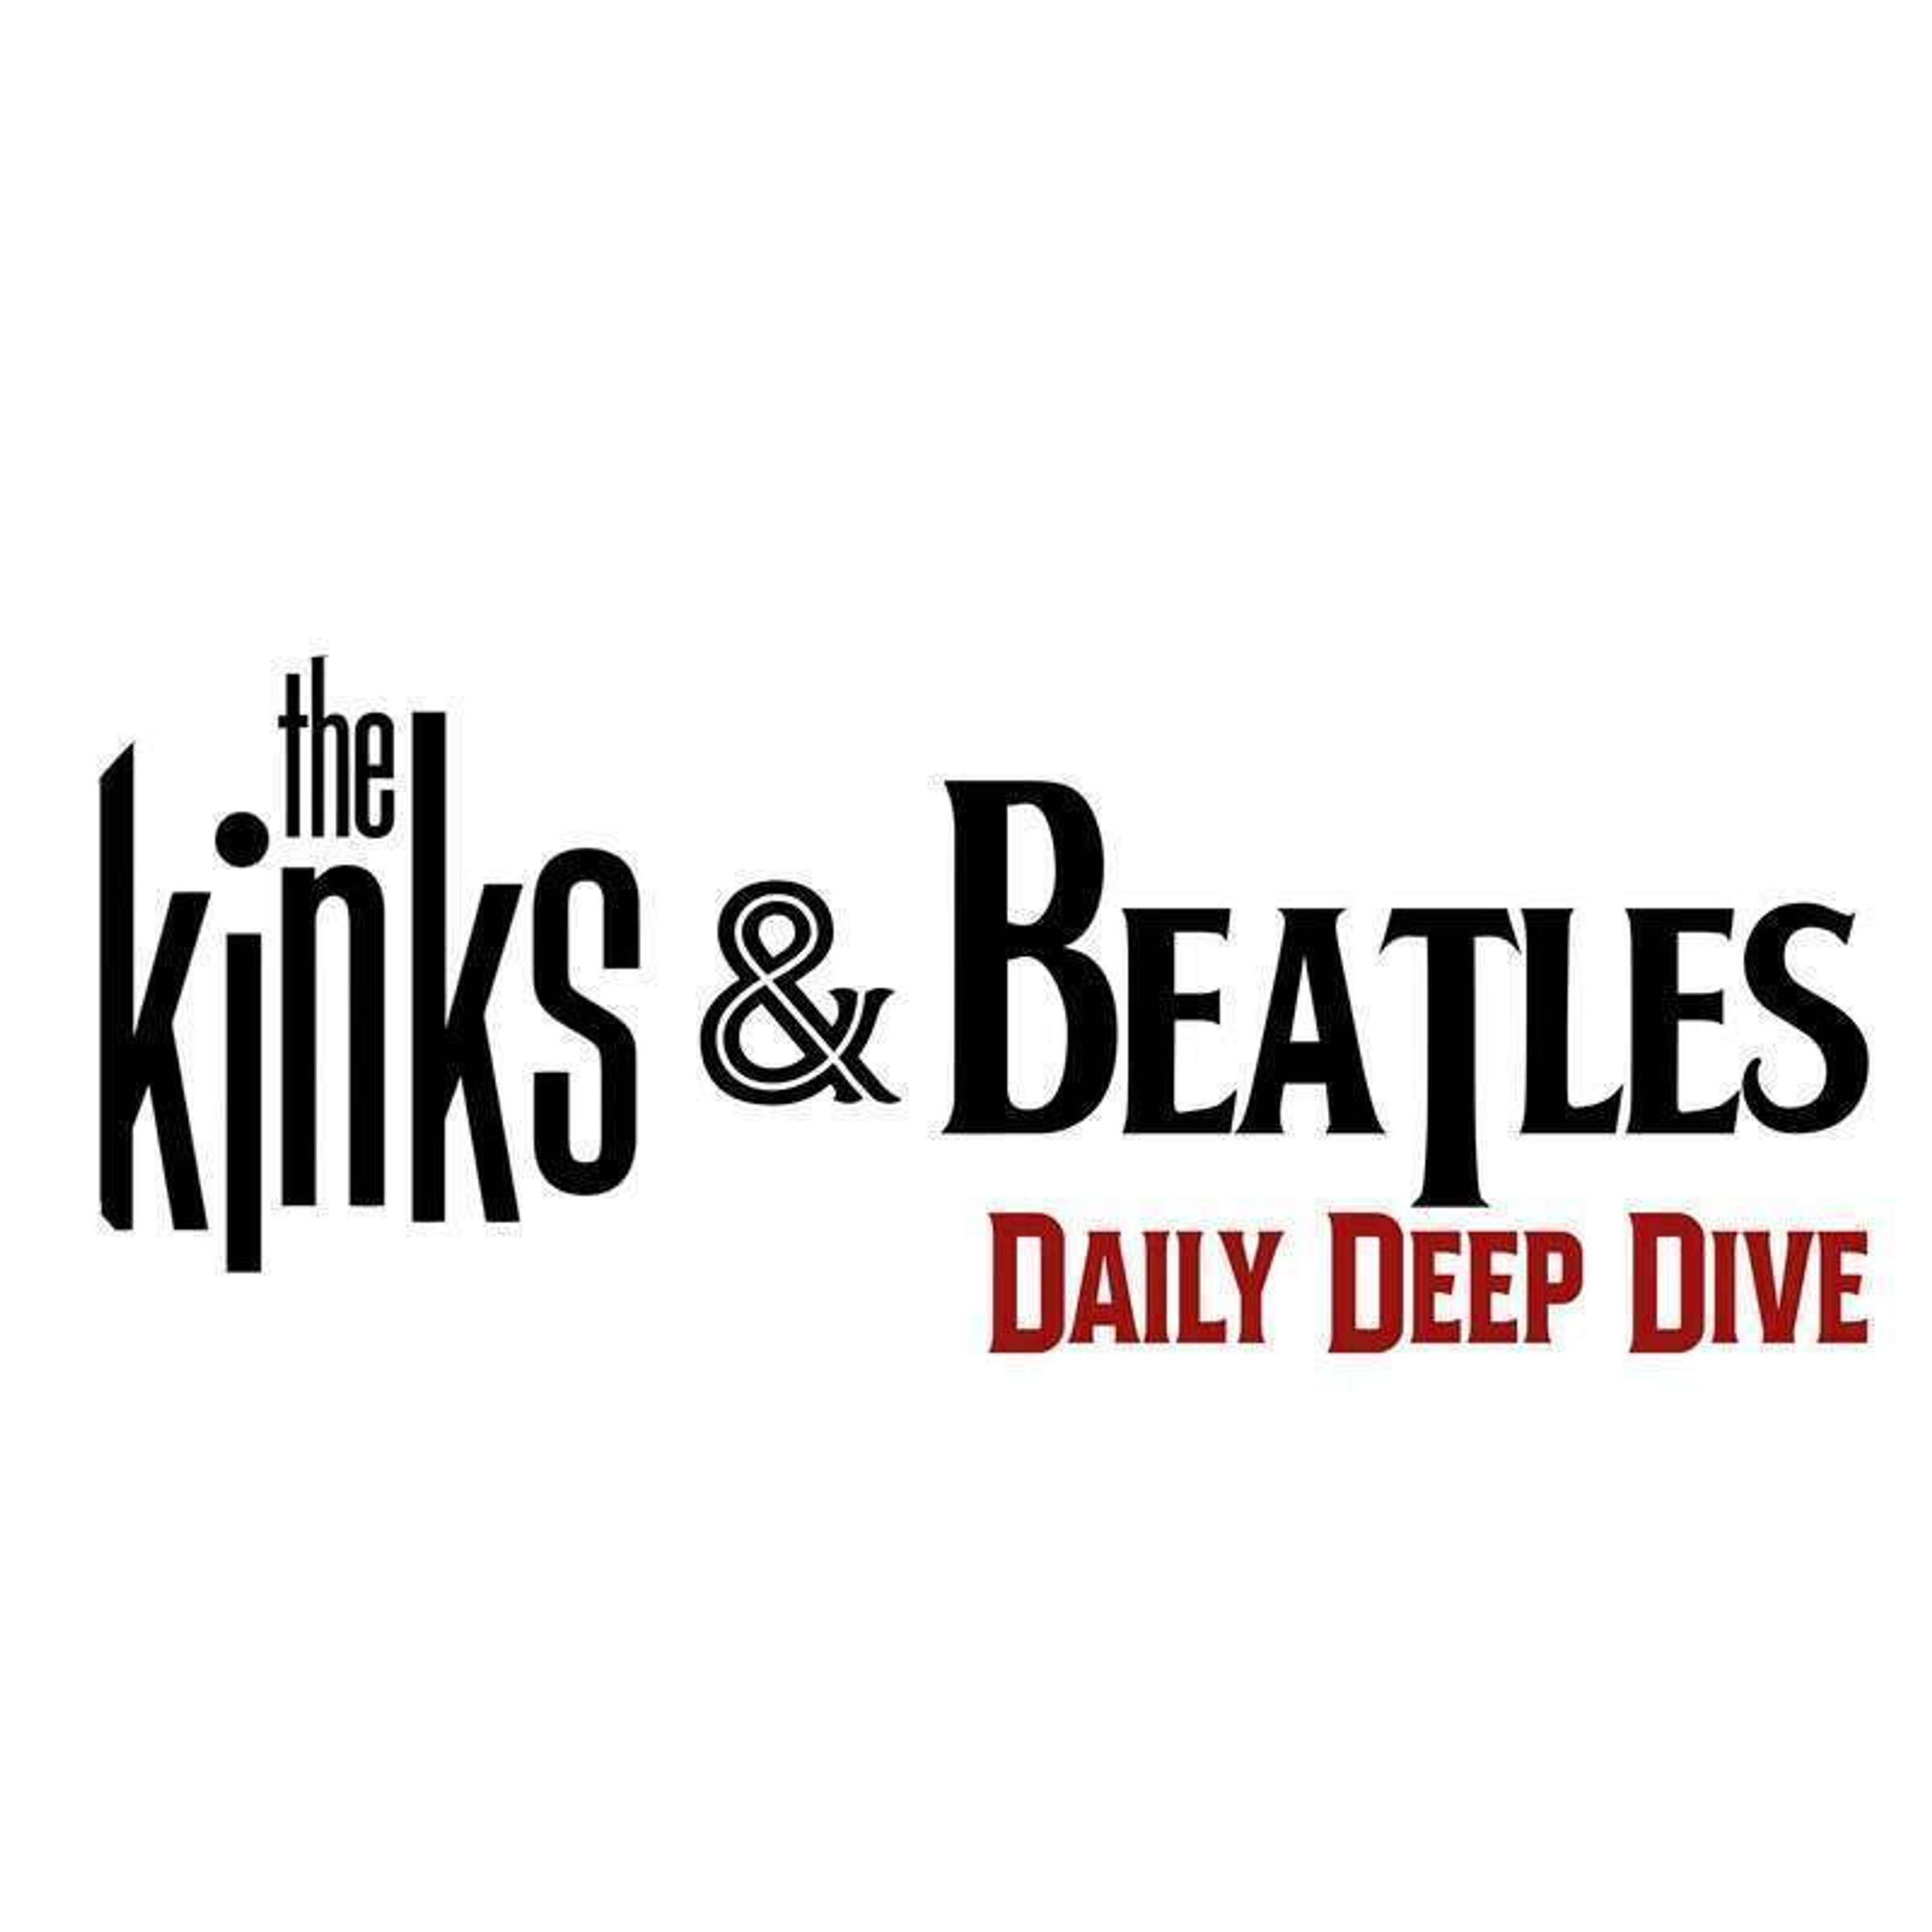 Life Goes On by The Kinks